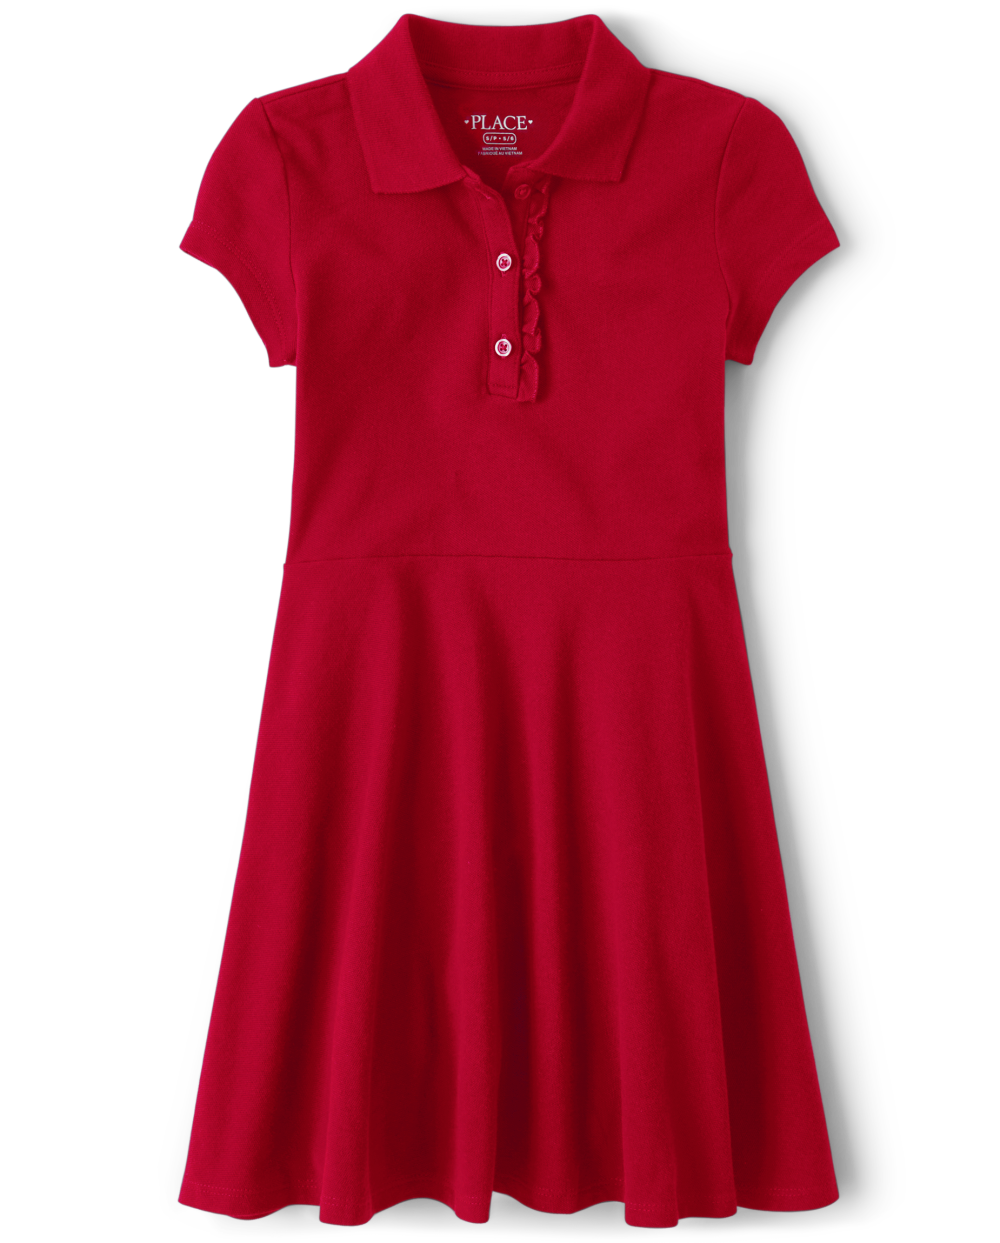 Girls Collared Above the Knee Short Sleeves Sleeves Ruffle Trim Dress